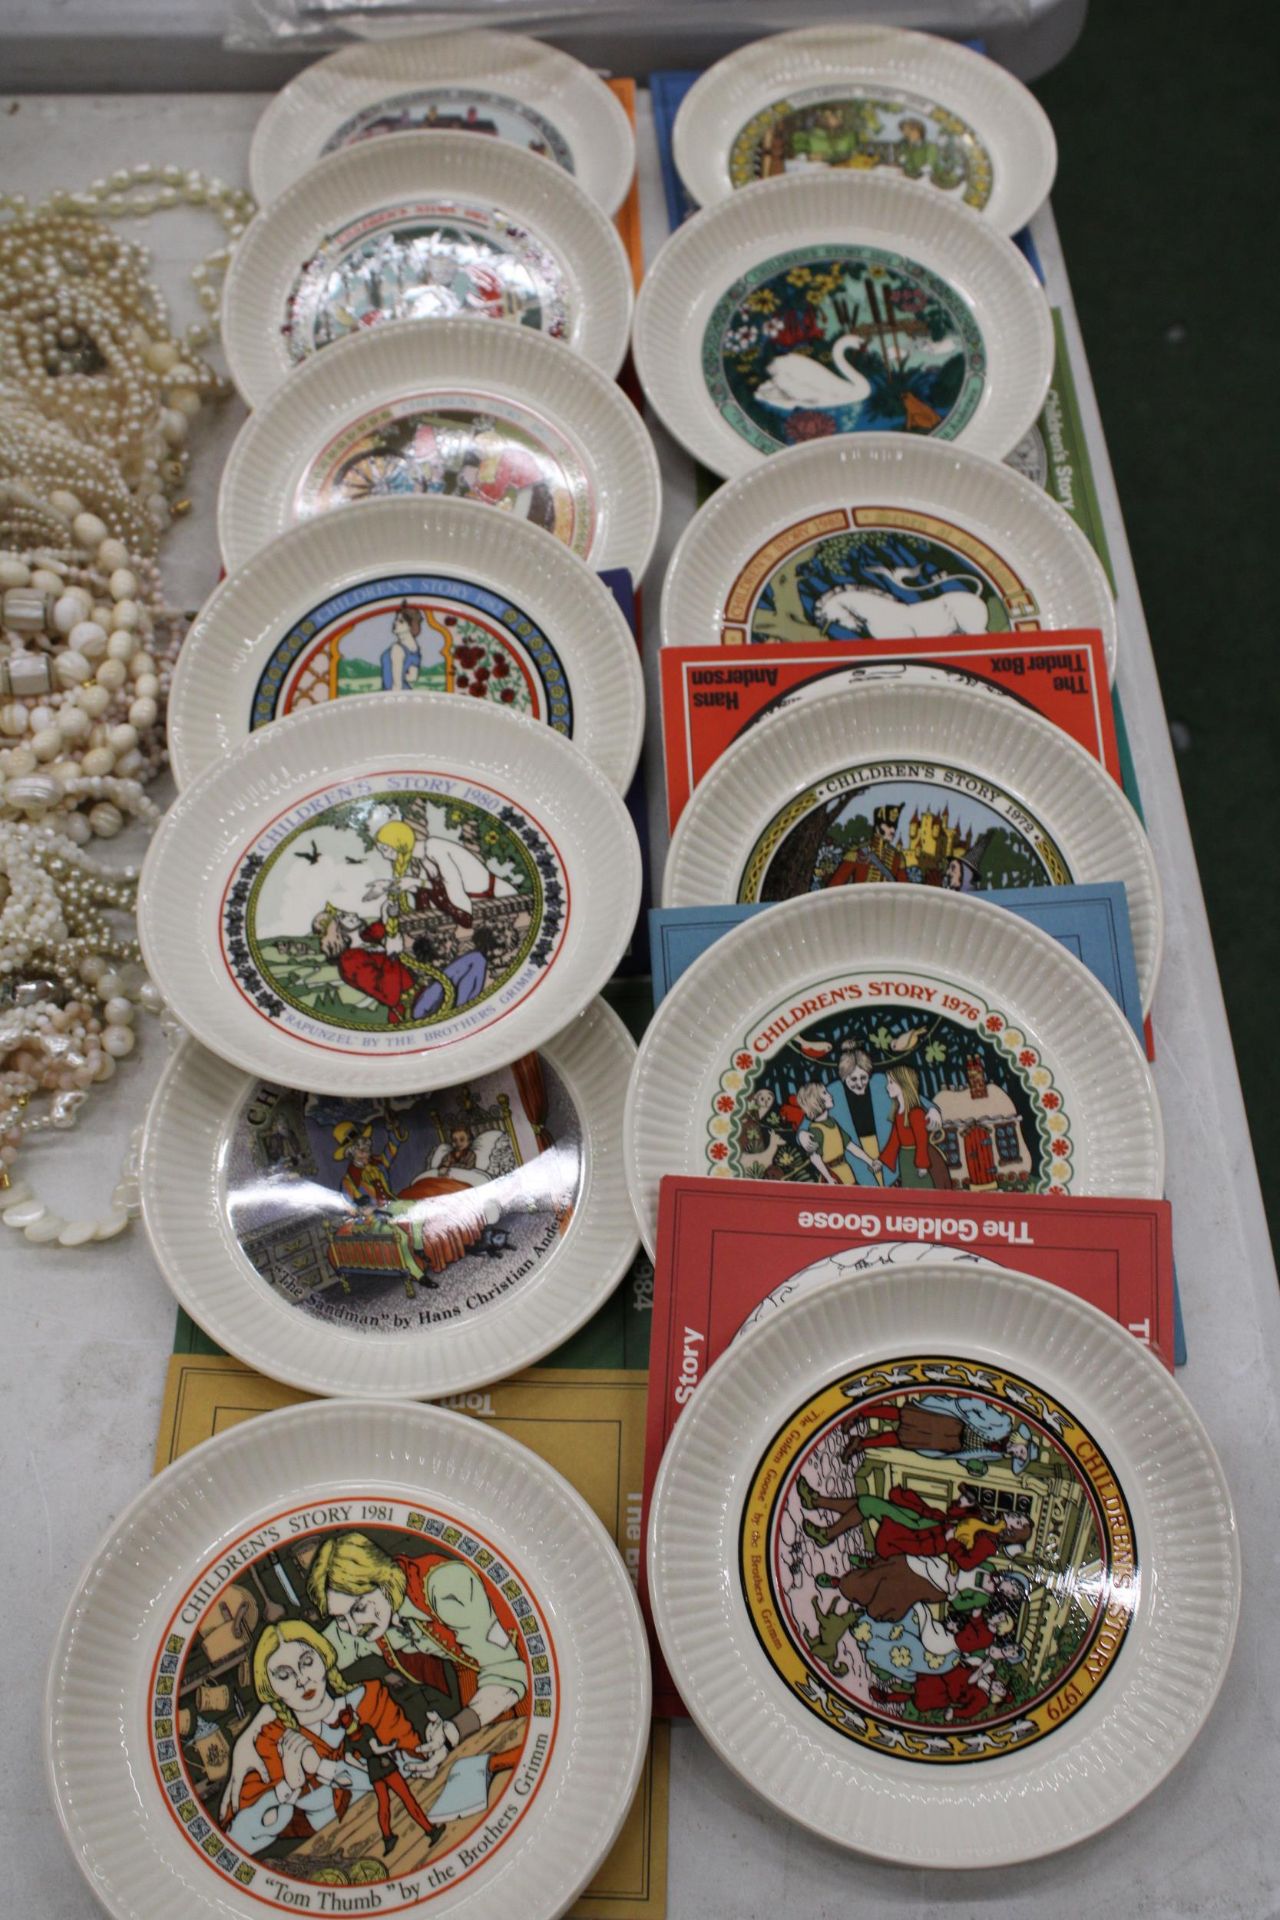 A COLLECTION OF VINTAGE WEDGWOOD, CHILDREN'S STORY PLATES WITH BOOKLETS - 13 IN TOTAL